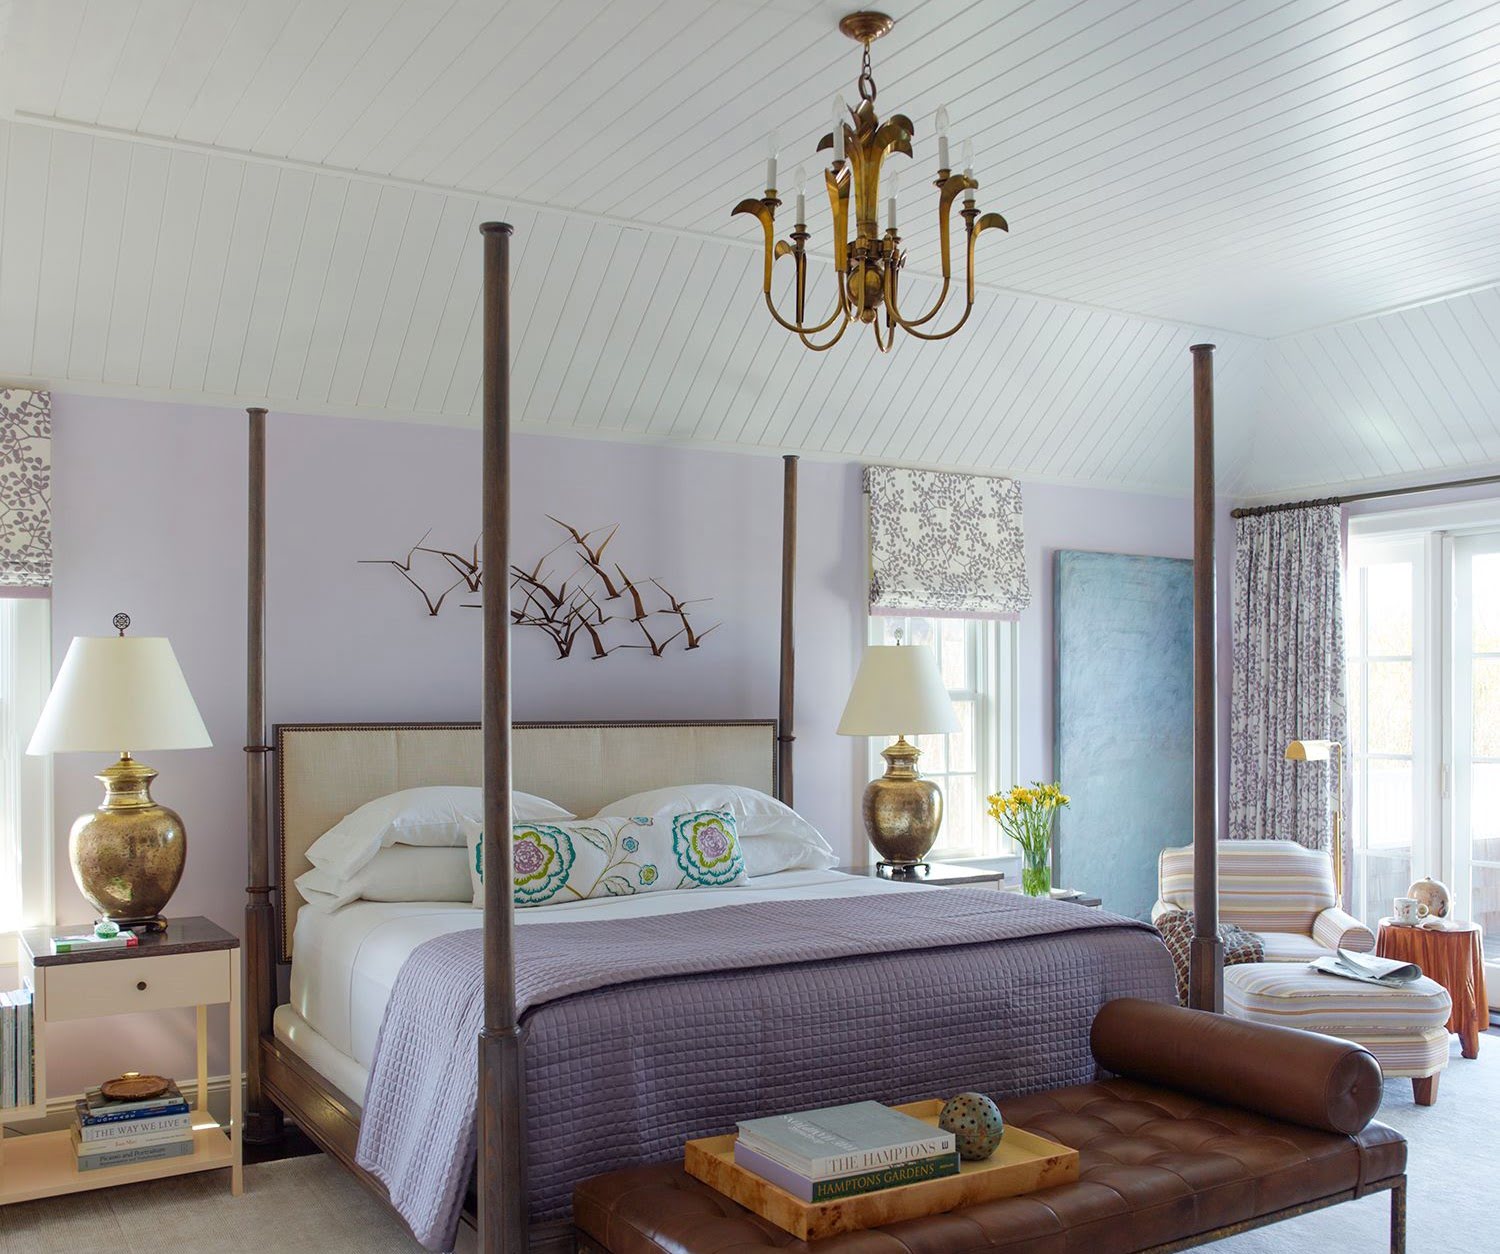 Which Color Is Best For A Bedroom? Experts Share Their Tips